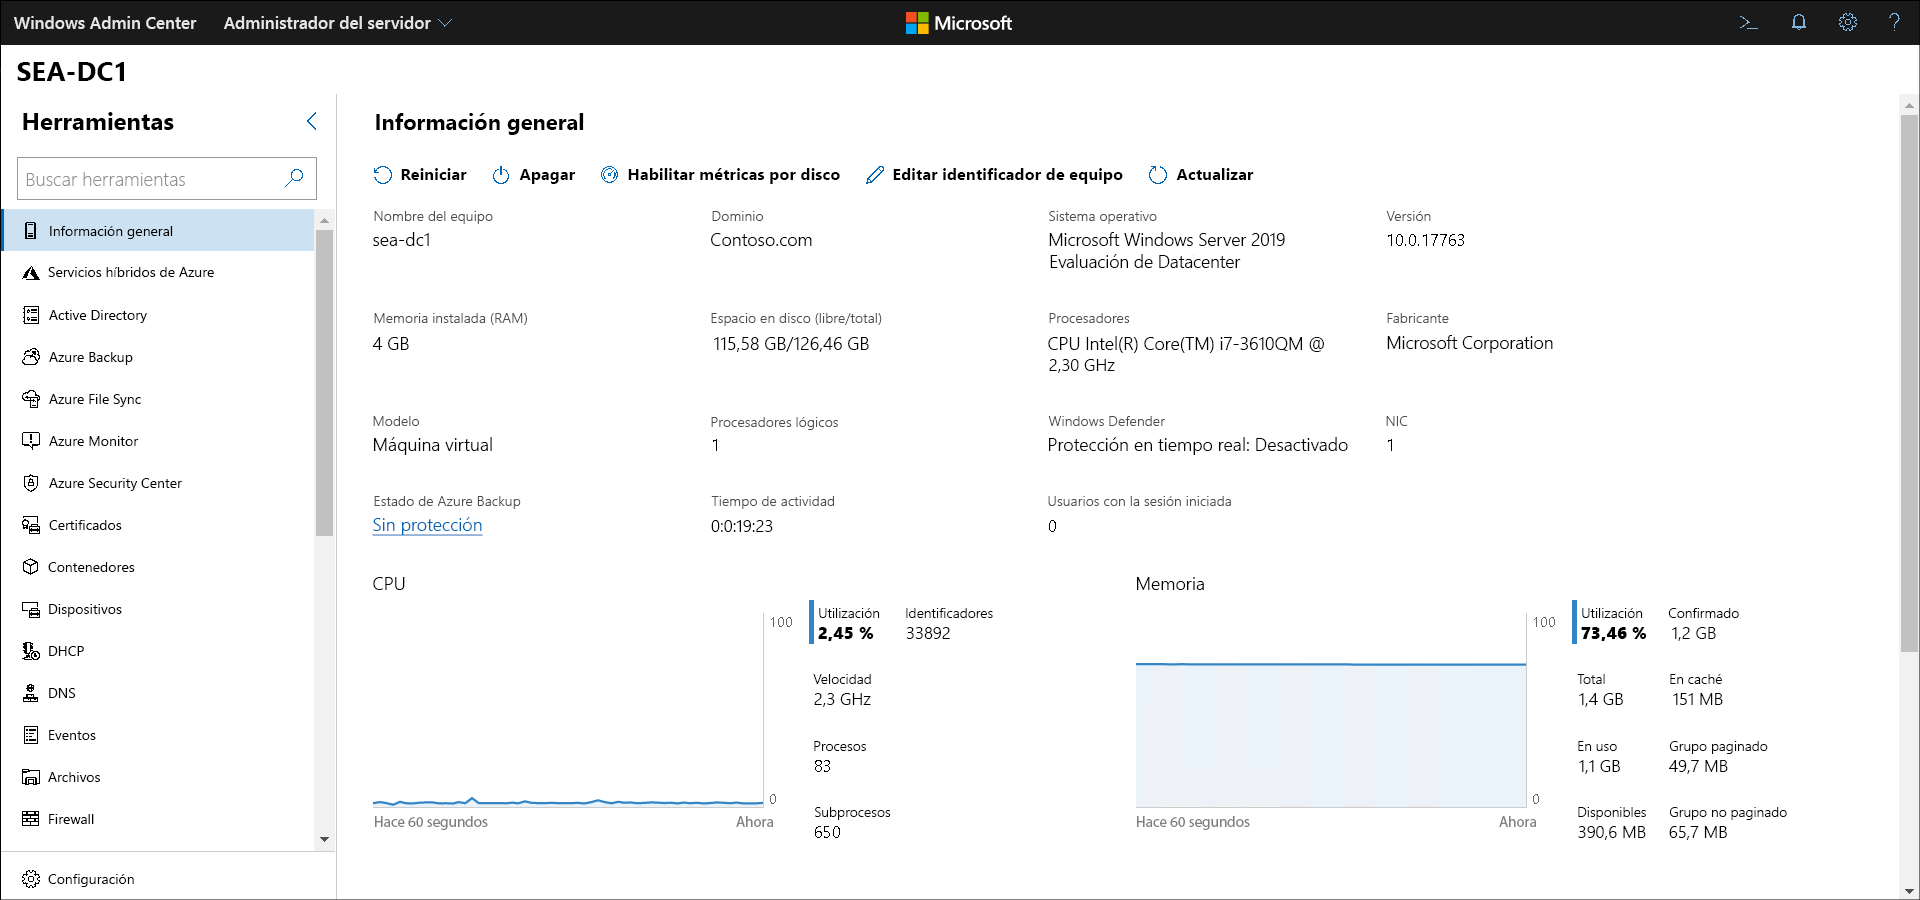 A screenshot of Windows Admin Center. The administrator has selected Server Manager. The Overview pane for a server called SEA-DC1 is displayed.